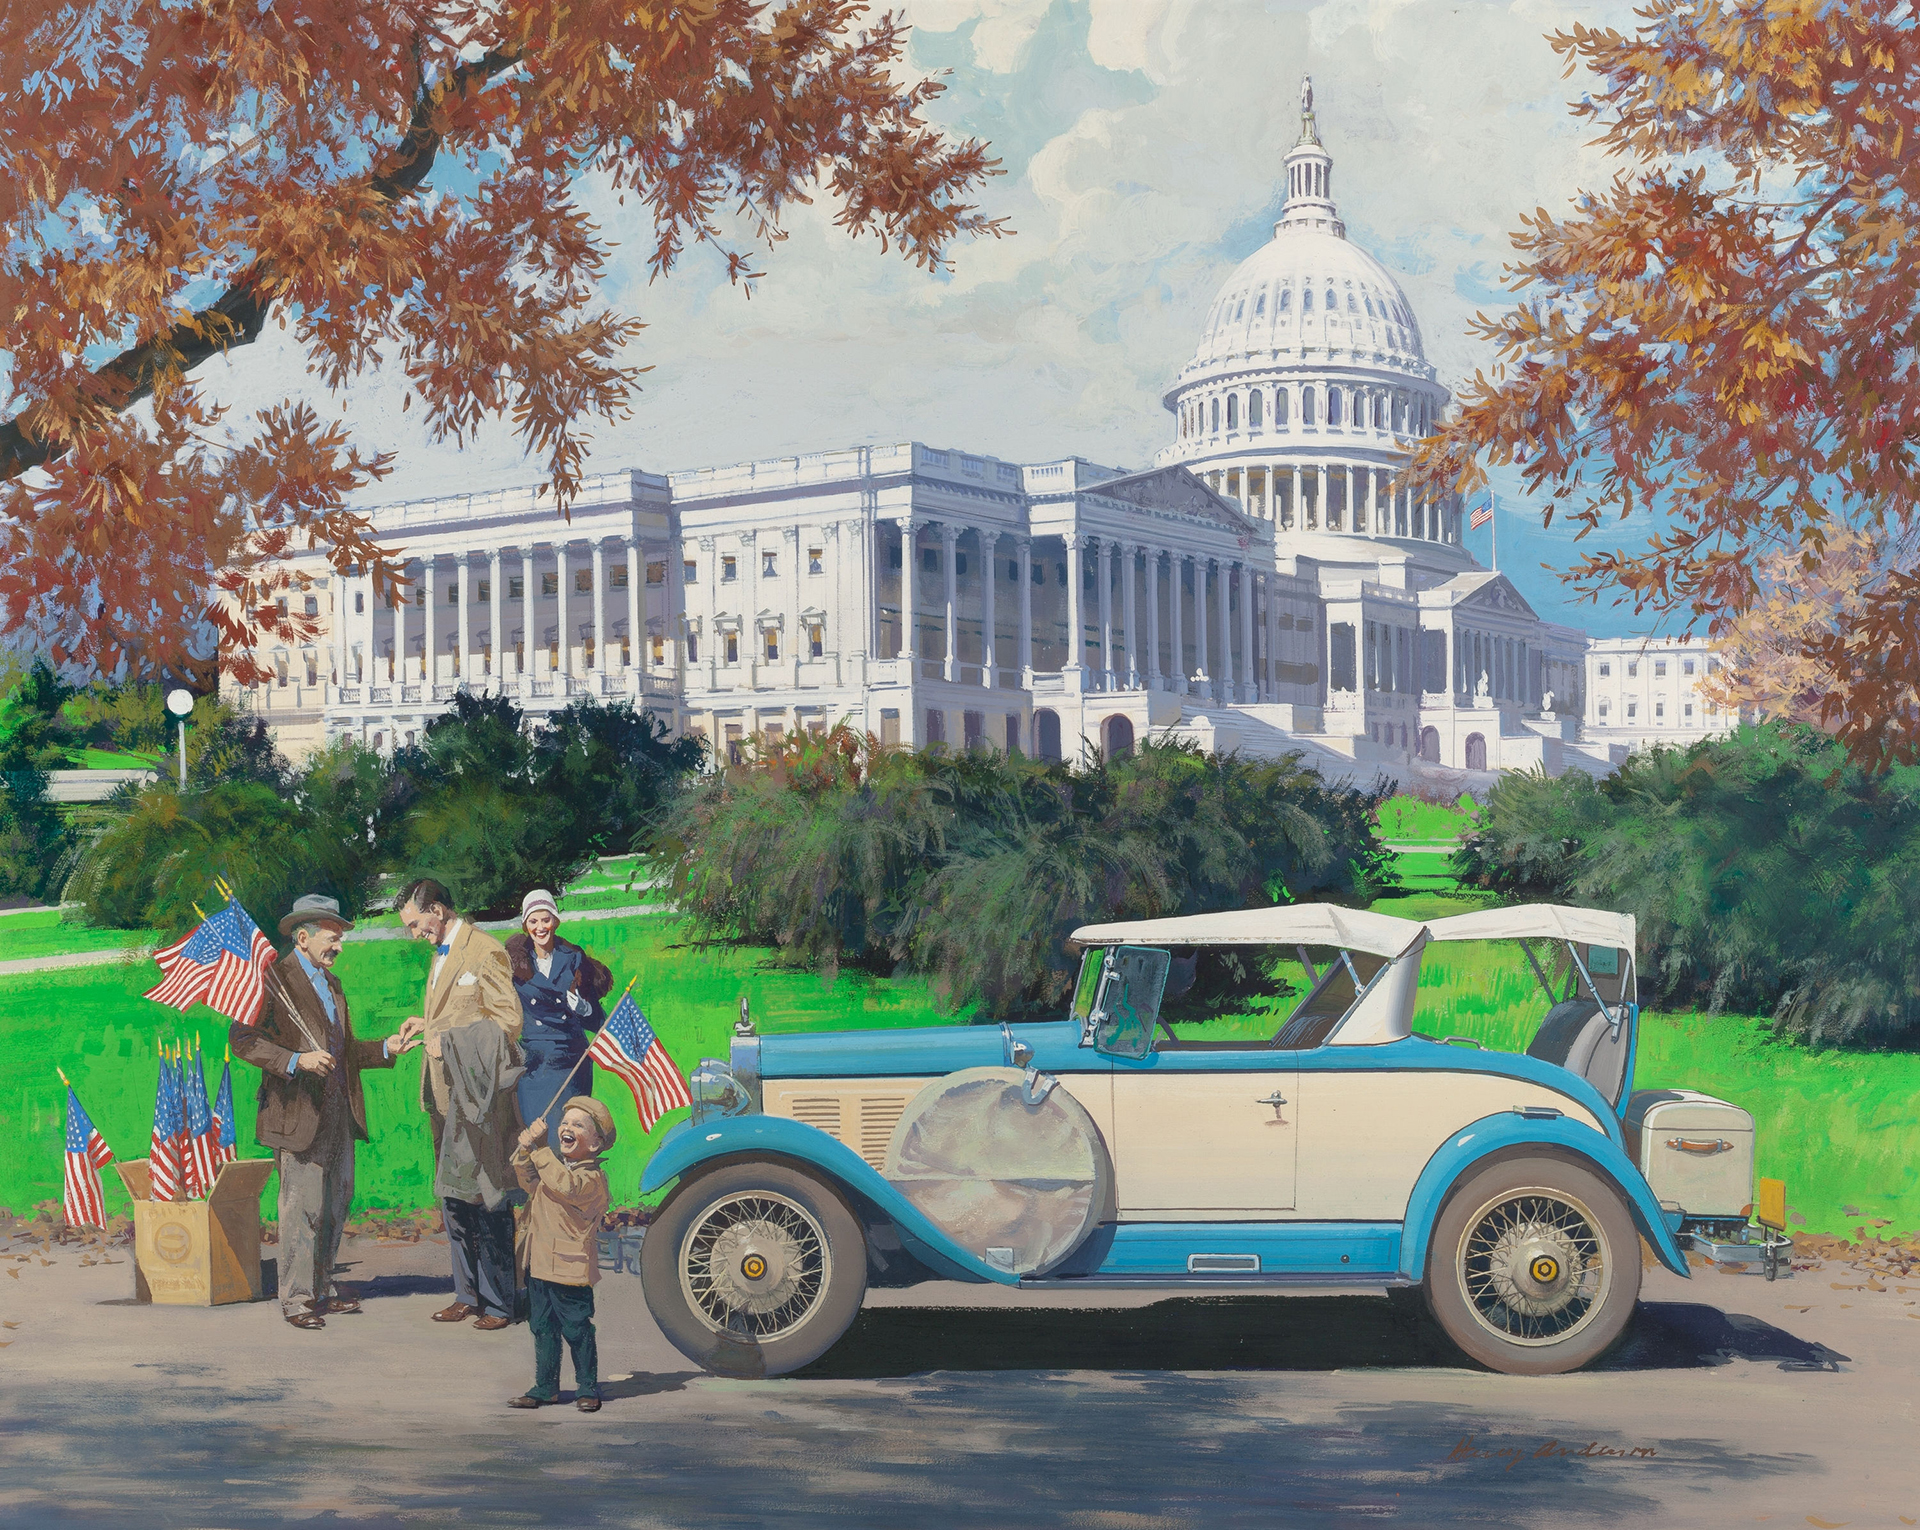 1928 Falcon-Knight Gray Ghost Roadster: Washington, D.C. - Illustrated by Harry Anderson